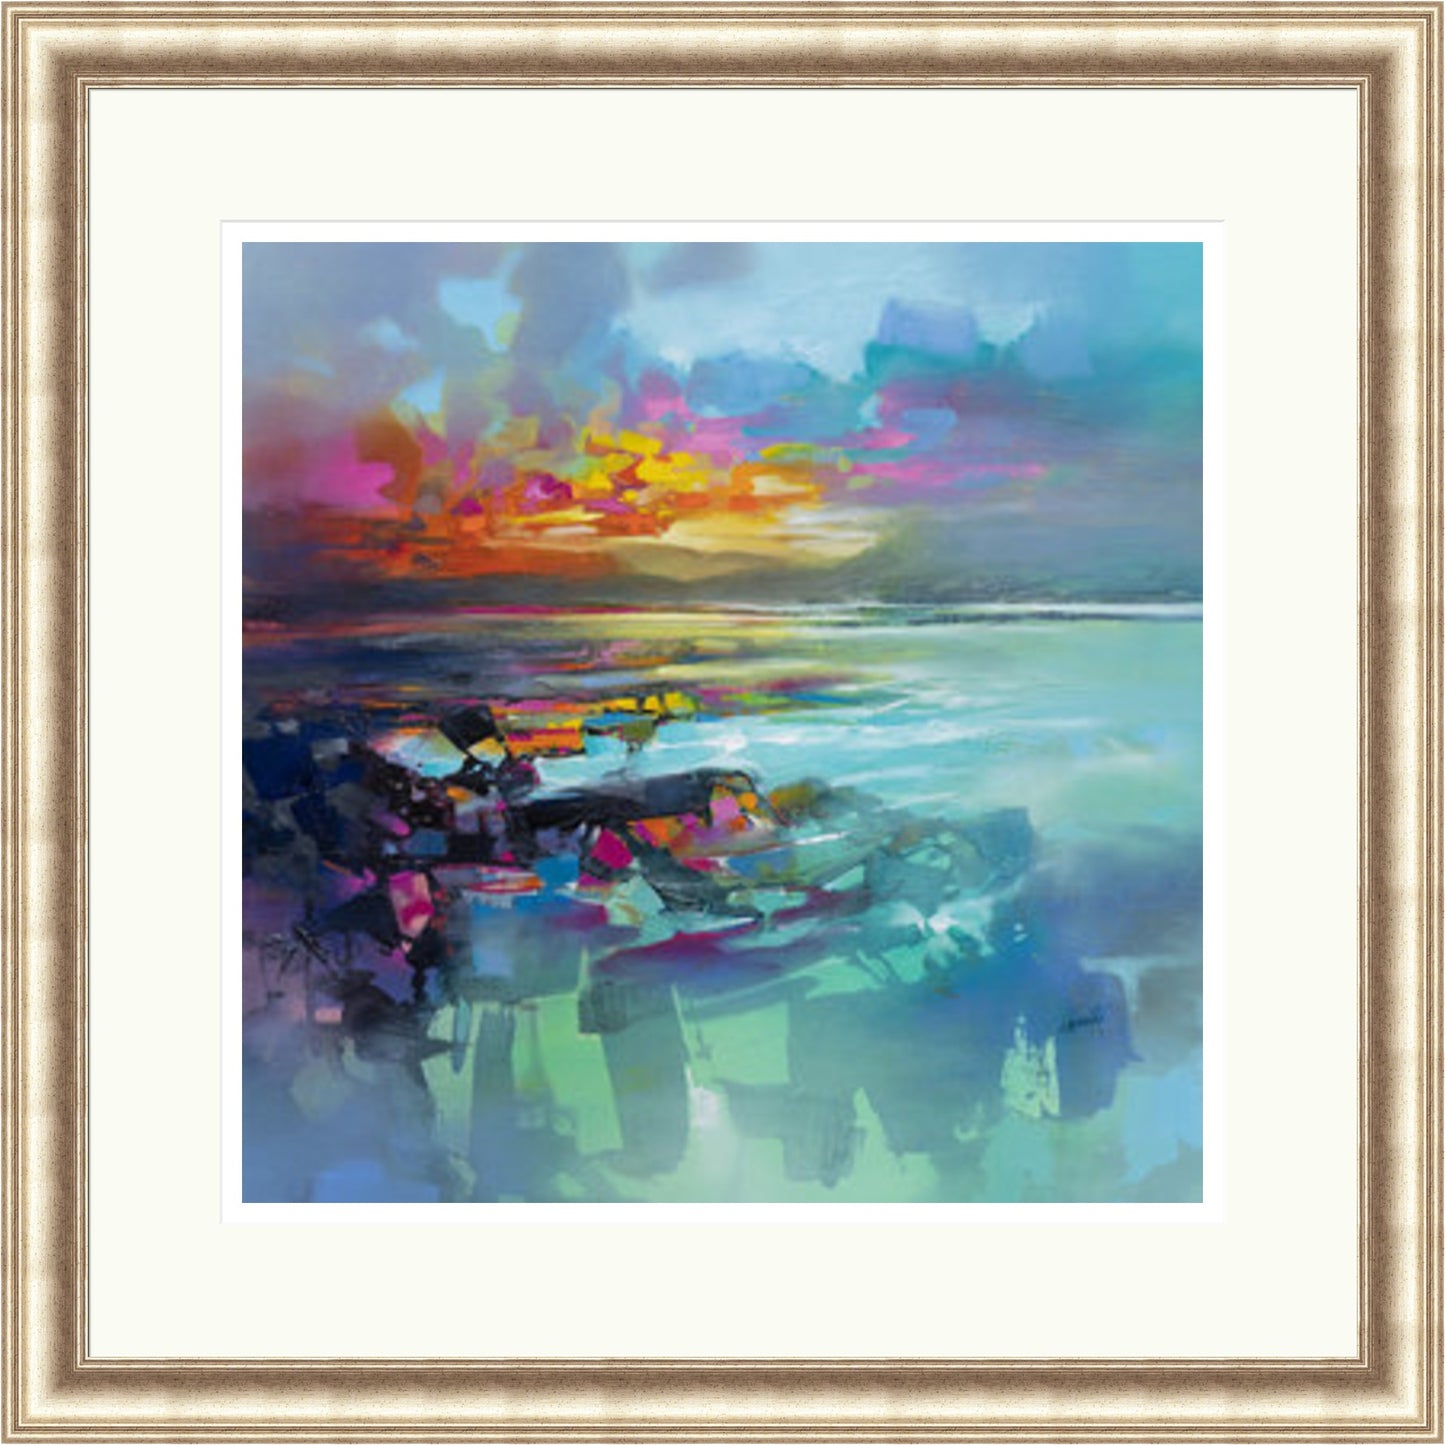 Approaching Arran (Limited Edition) by Scott Naismith